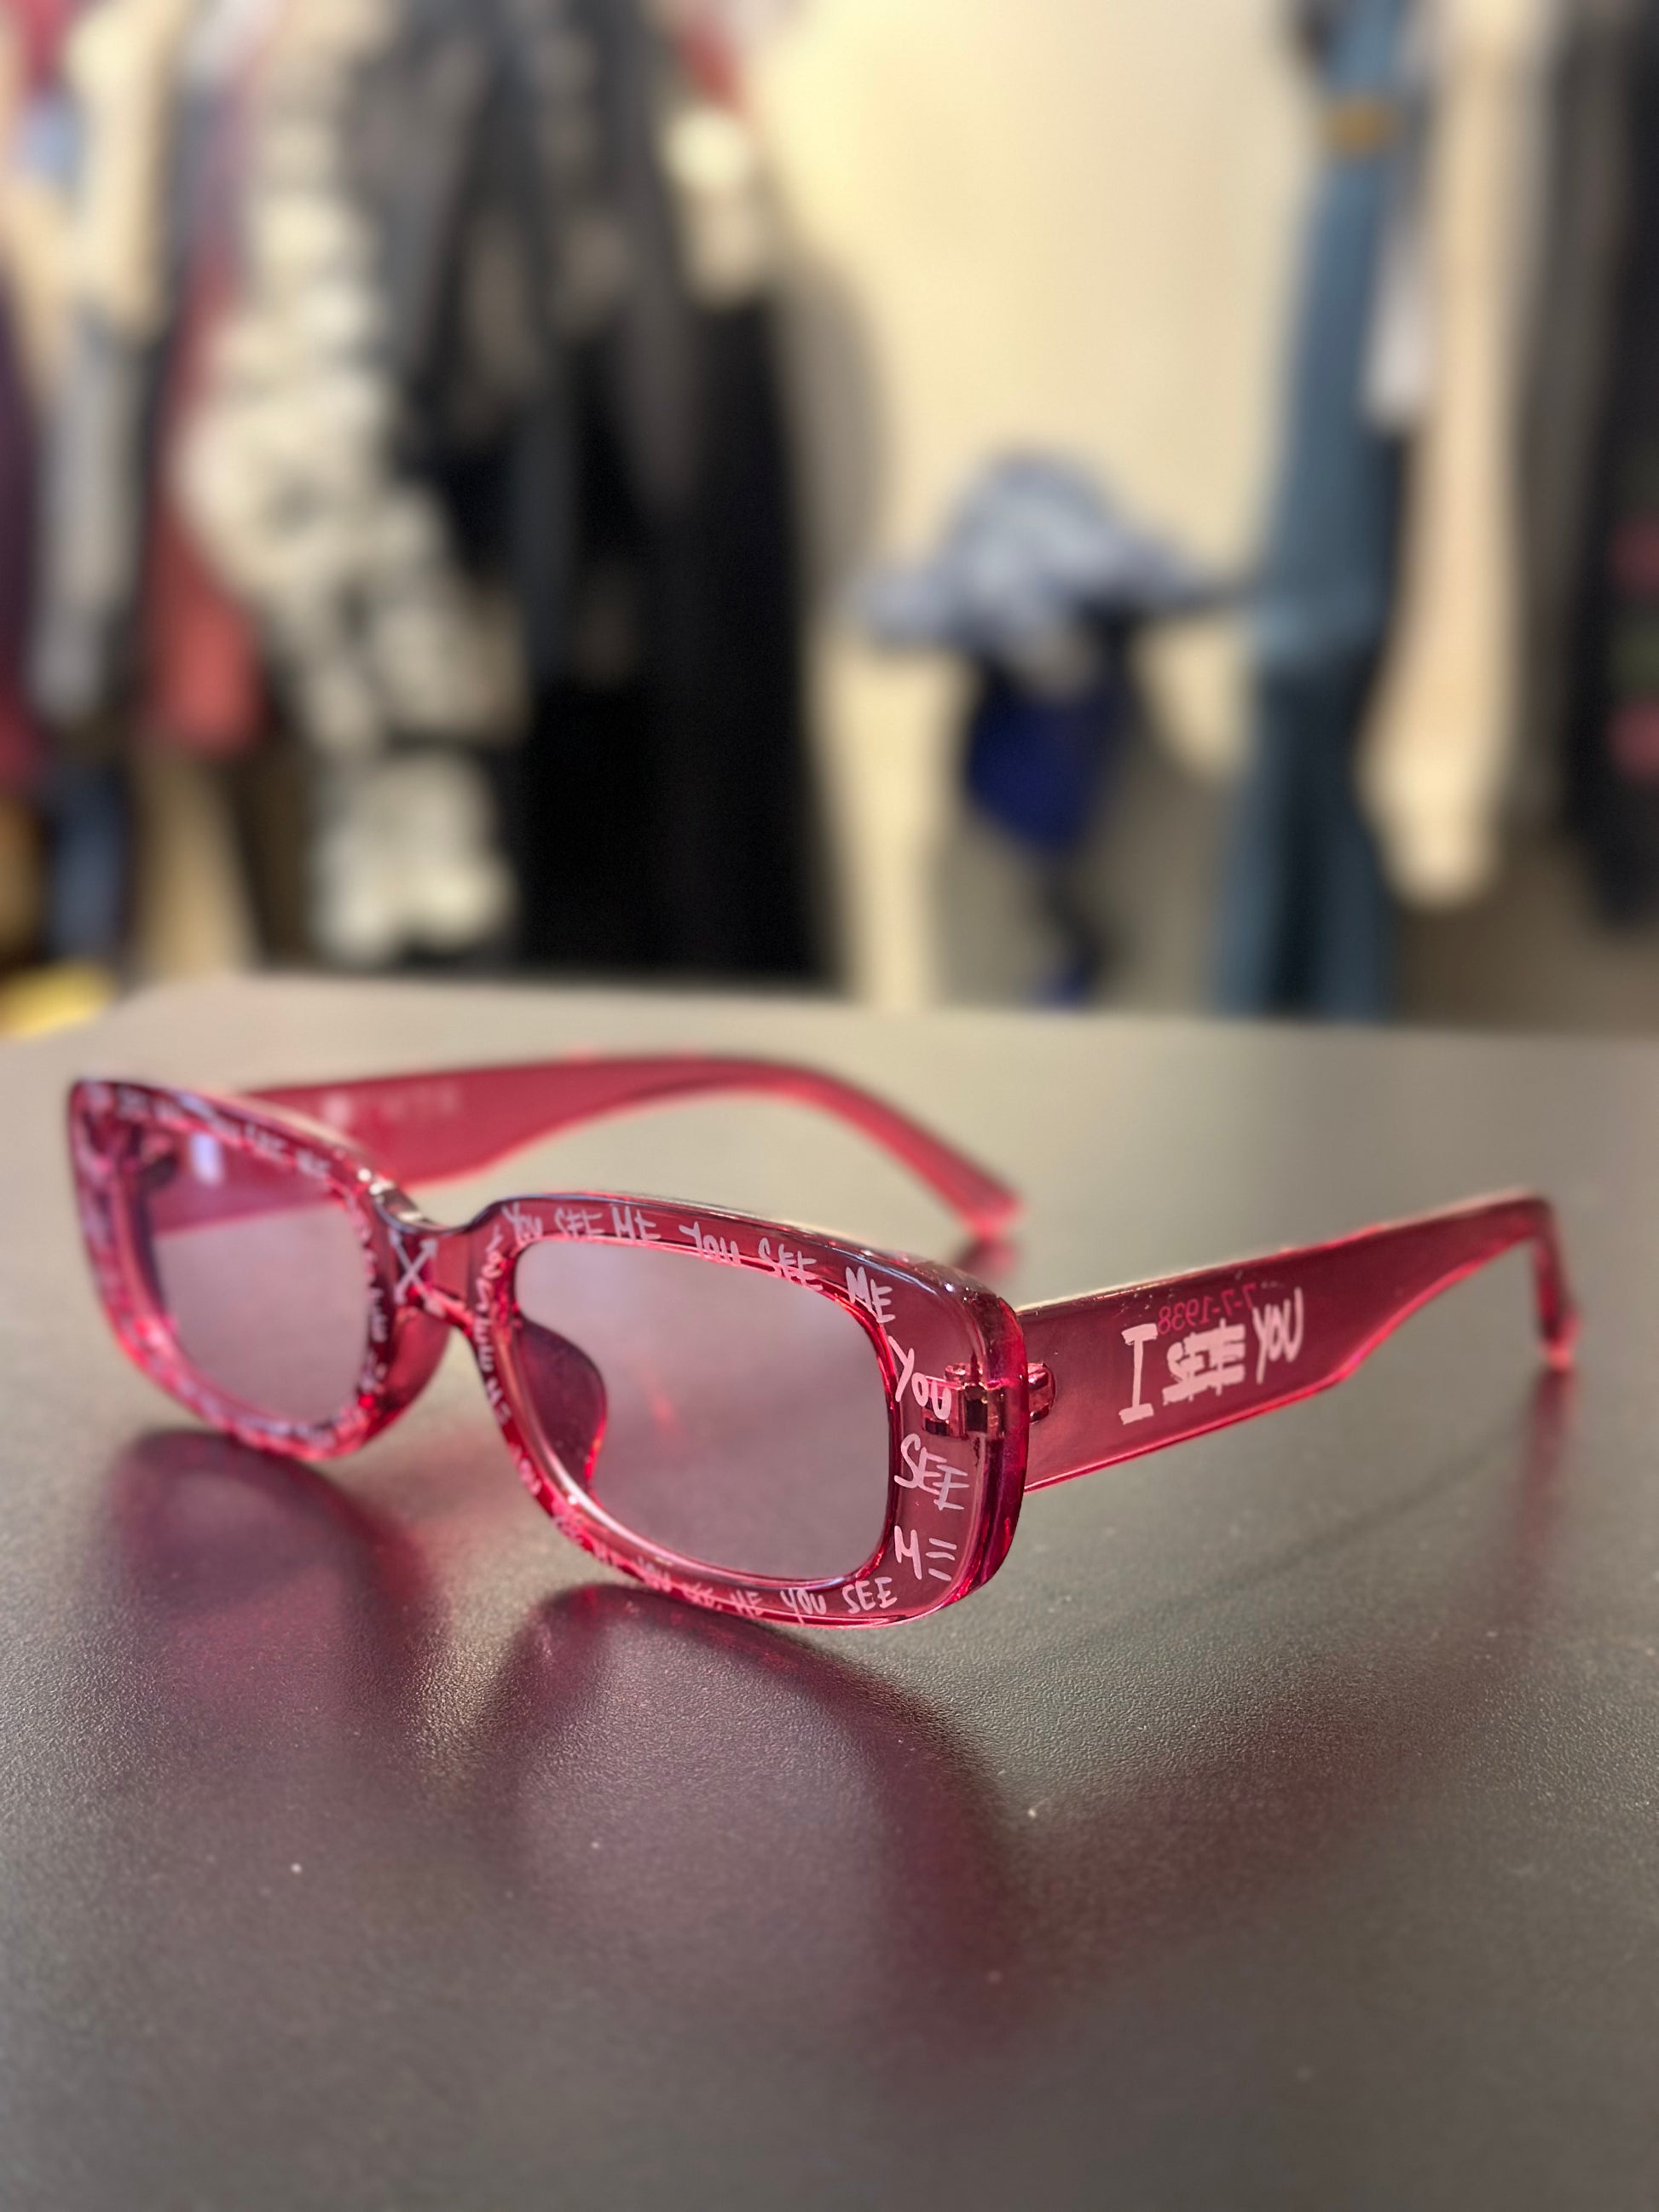  KNOTWTR: I SEE YOU/ RELAX SUNGLASSES (clear pink)